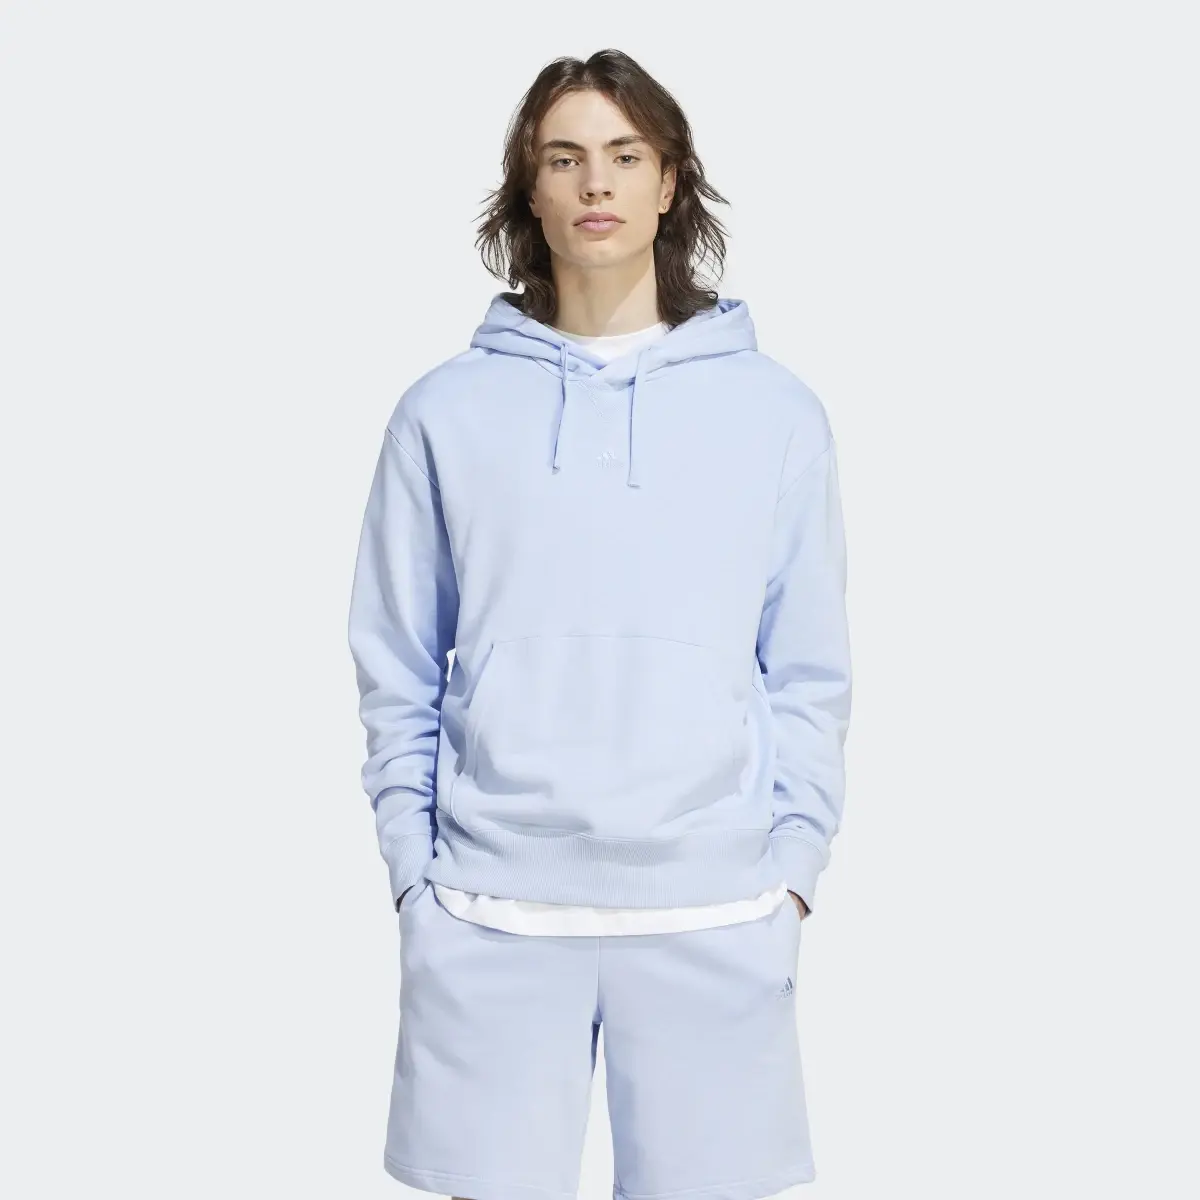 Adidas ALL SZN French Terry Hoodie. 2